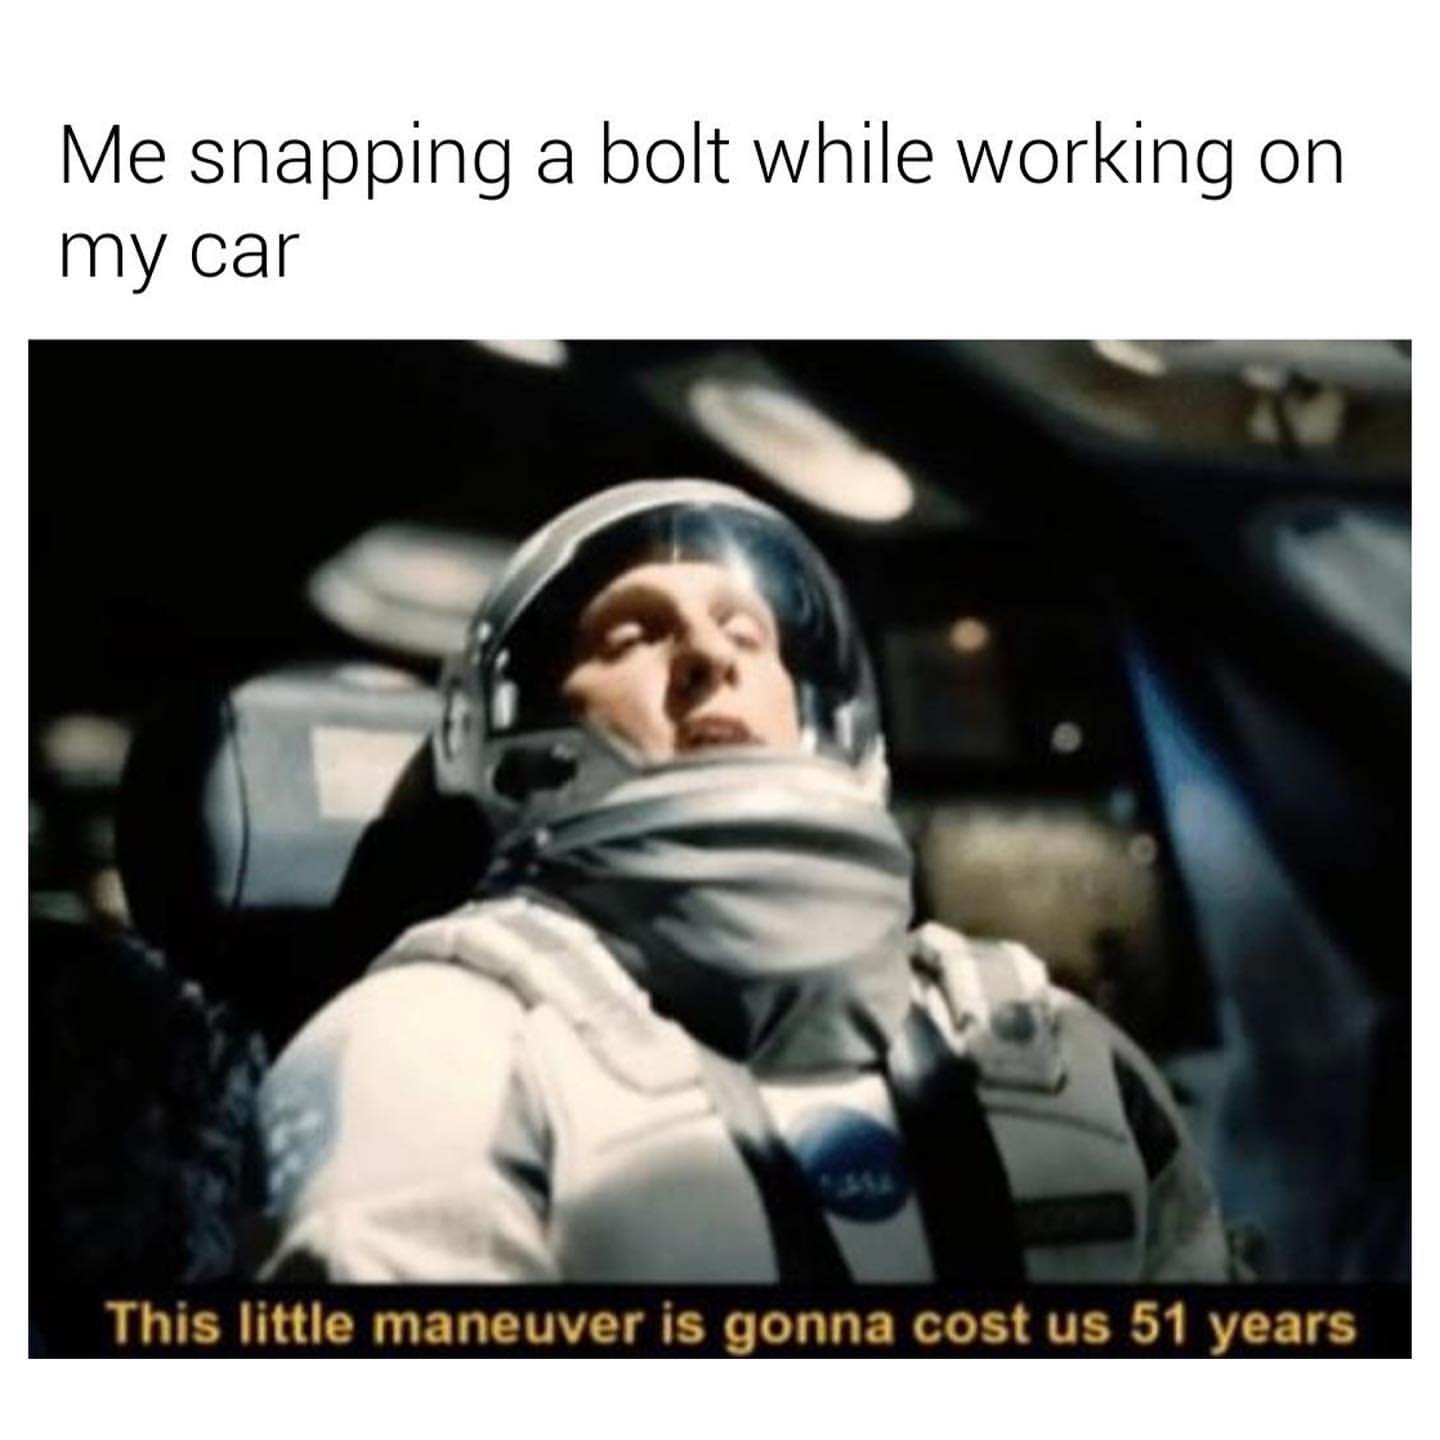 Me snapping a bolt while working on my car. This little maneuver is gonna cost us 51 years.